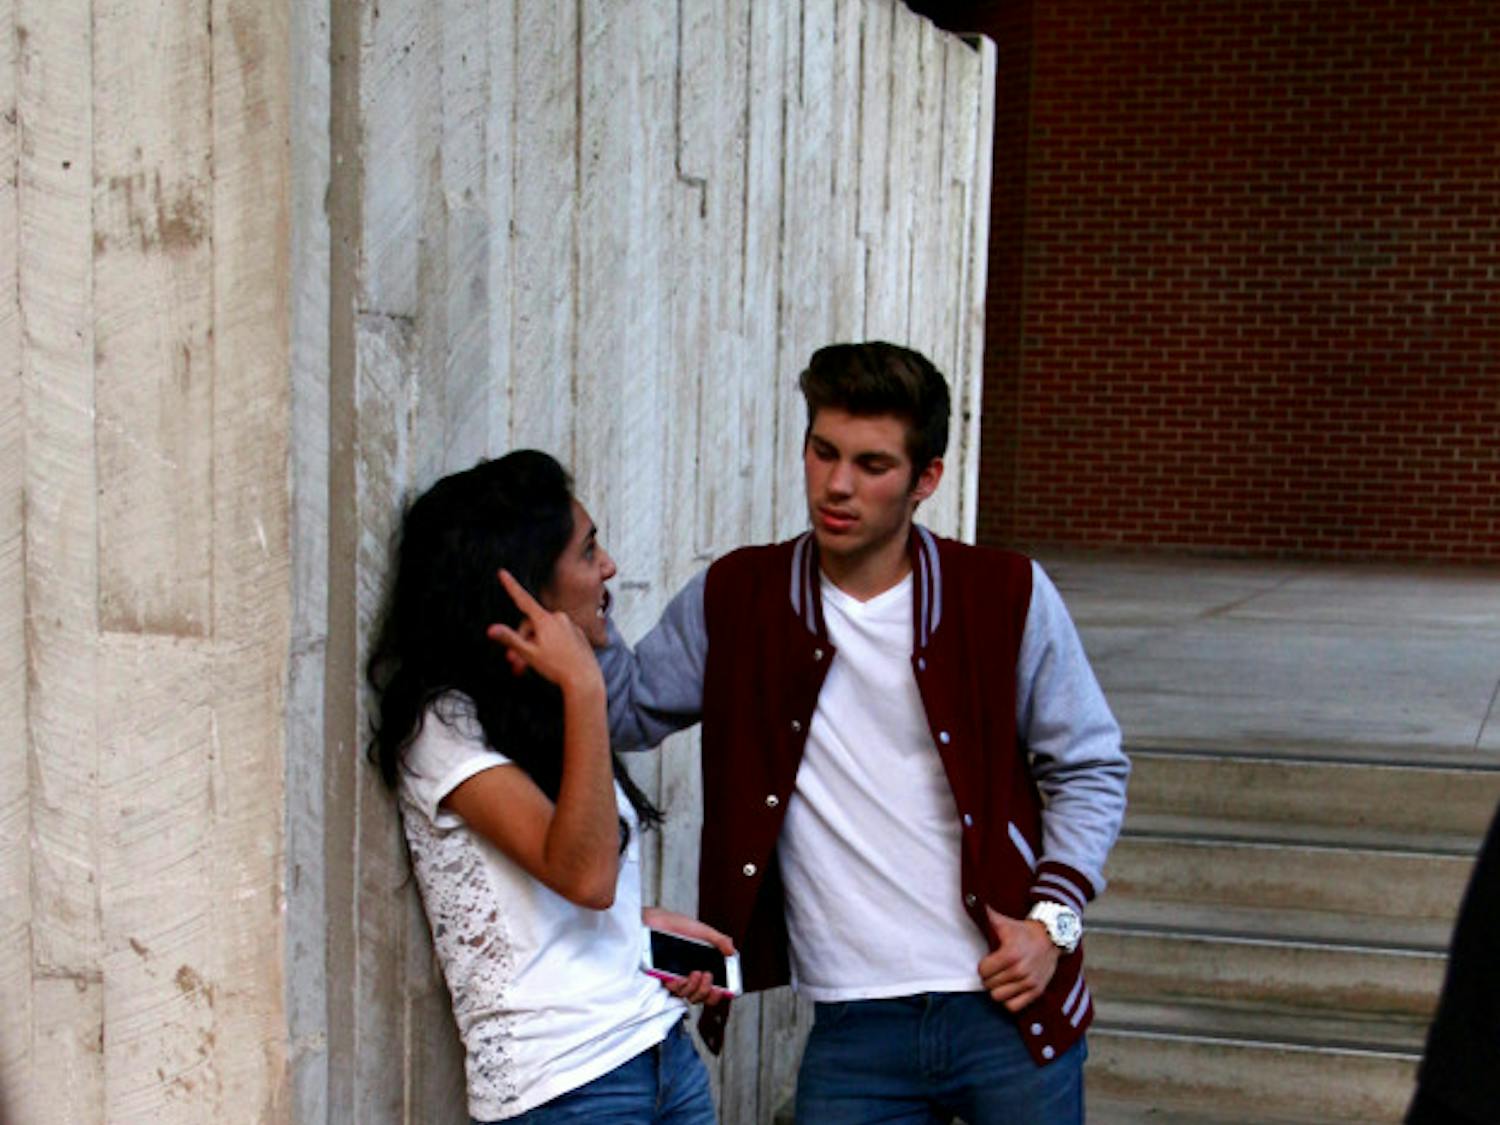 Trip, played by Ryan Golden, 19, hits on his ex-girlfriend Ashley, played by Marissa Secades, 19, at a party. The characters moved the audience to other spots in the Newins-Zeigler Hall Breezeway throughout the night as they followed the story of Ashley's sexual assault and the reactions from her friends and family.